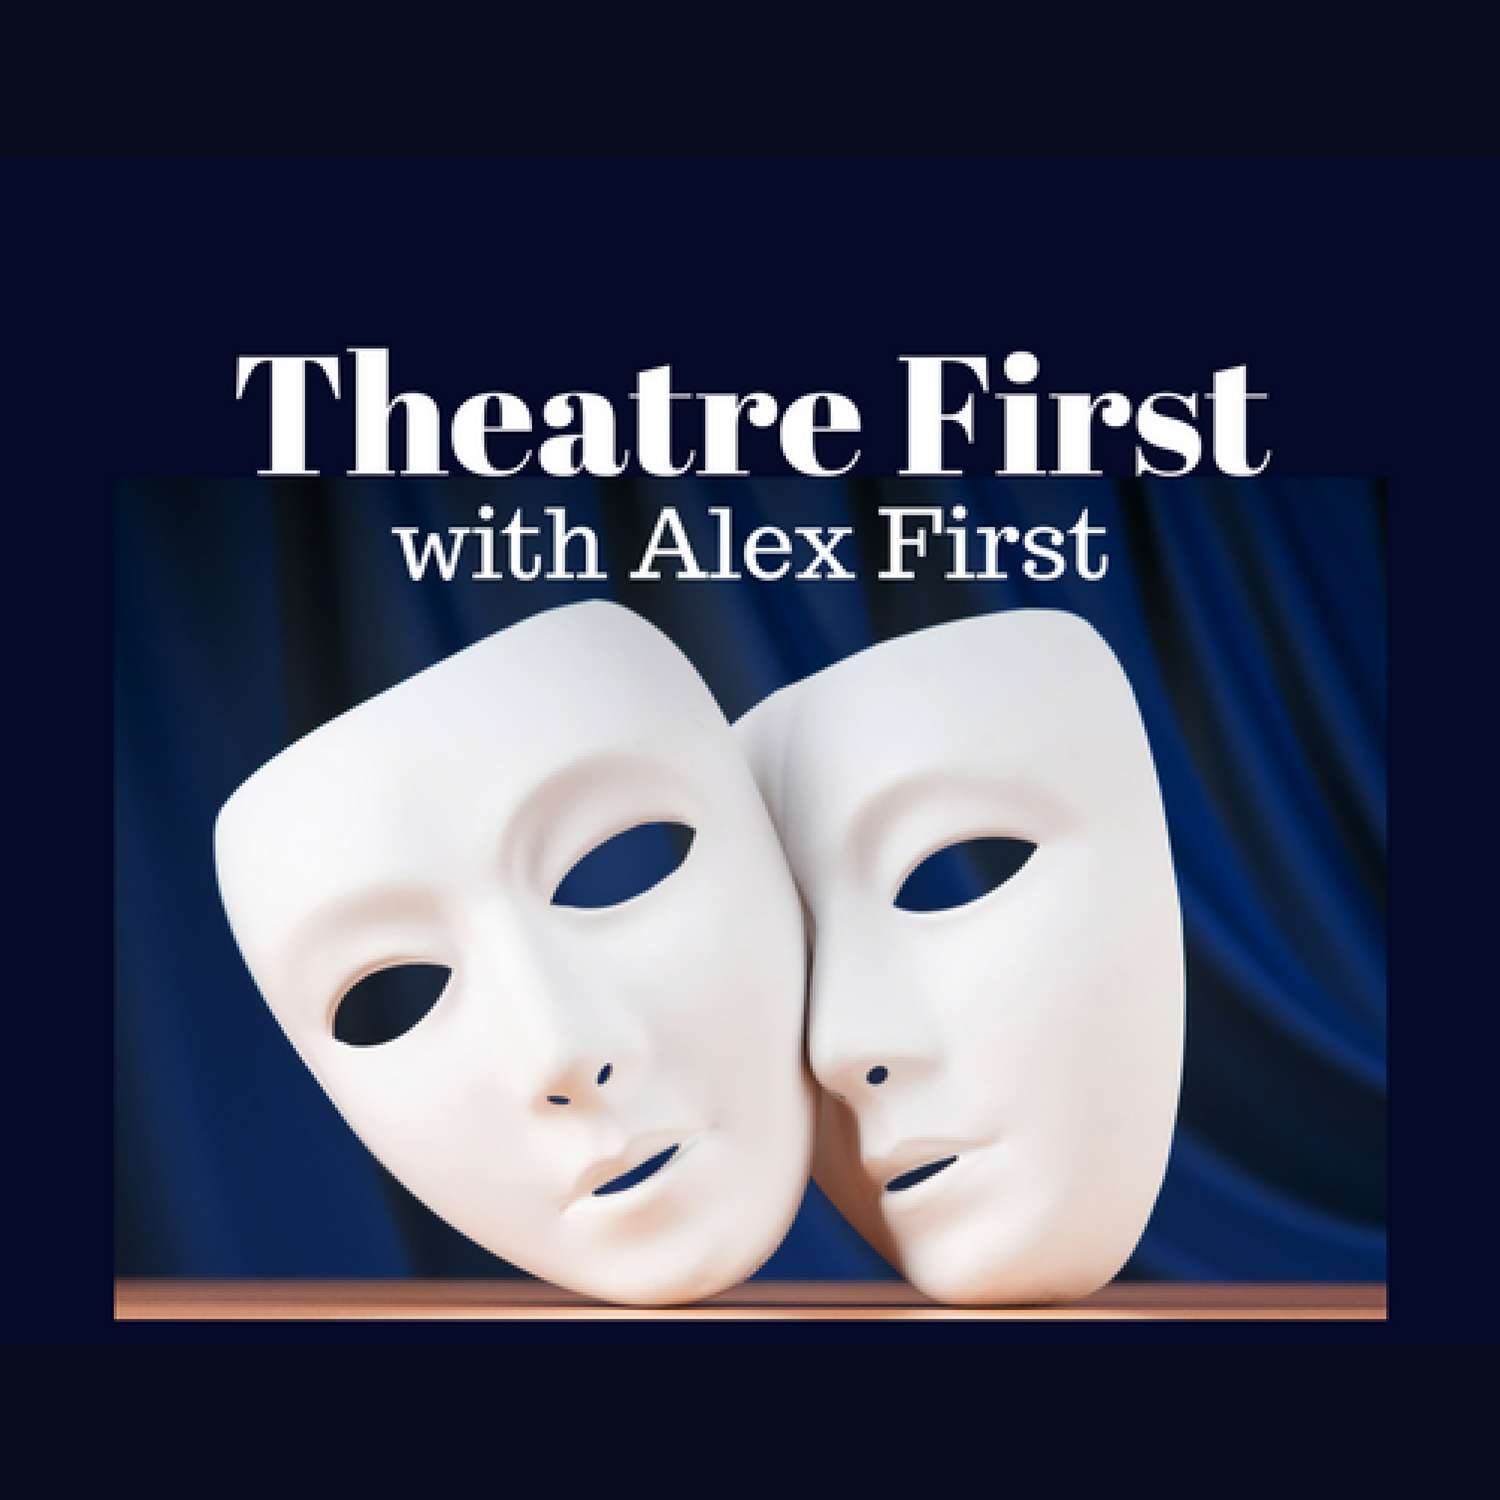 43: The Way Out - Theatre First with Alex First Episode 43